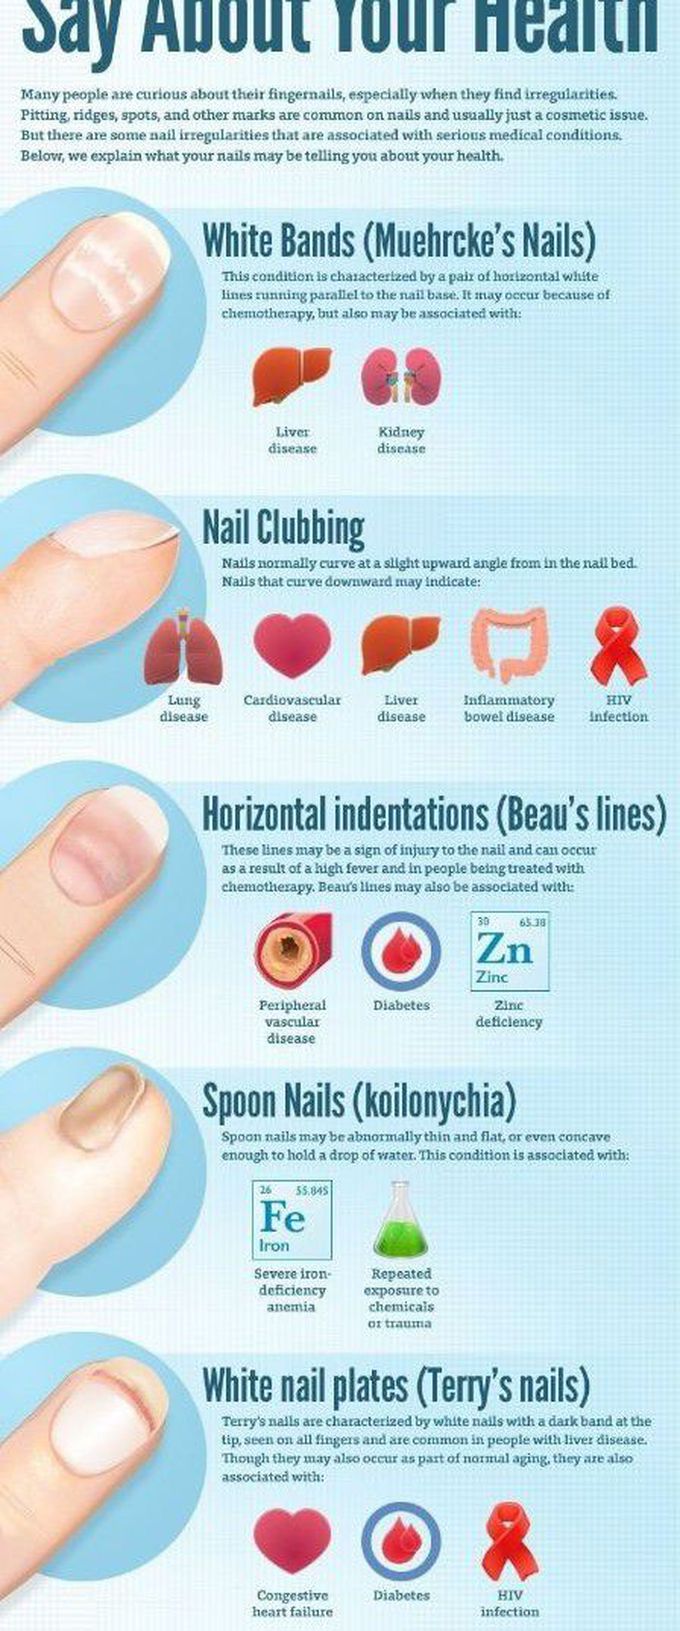 Nail changes and itz relation to various diseases🤔